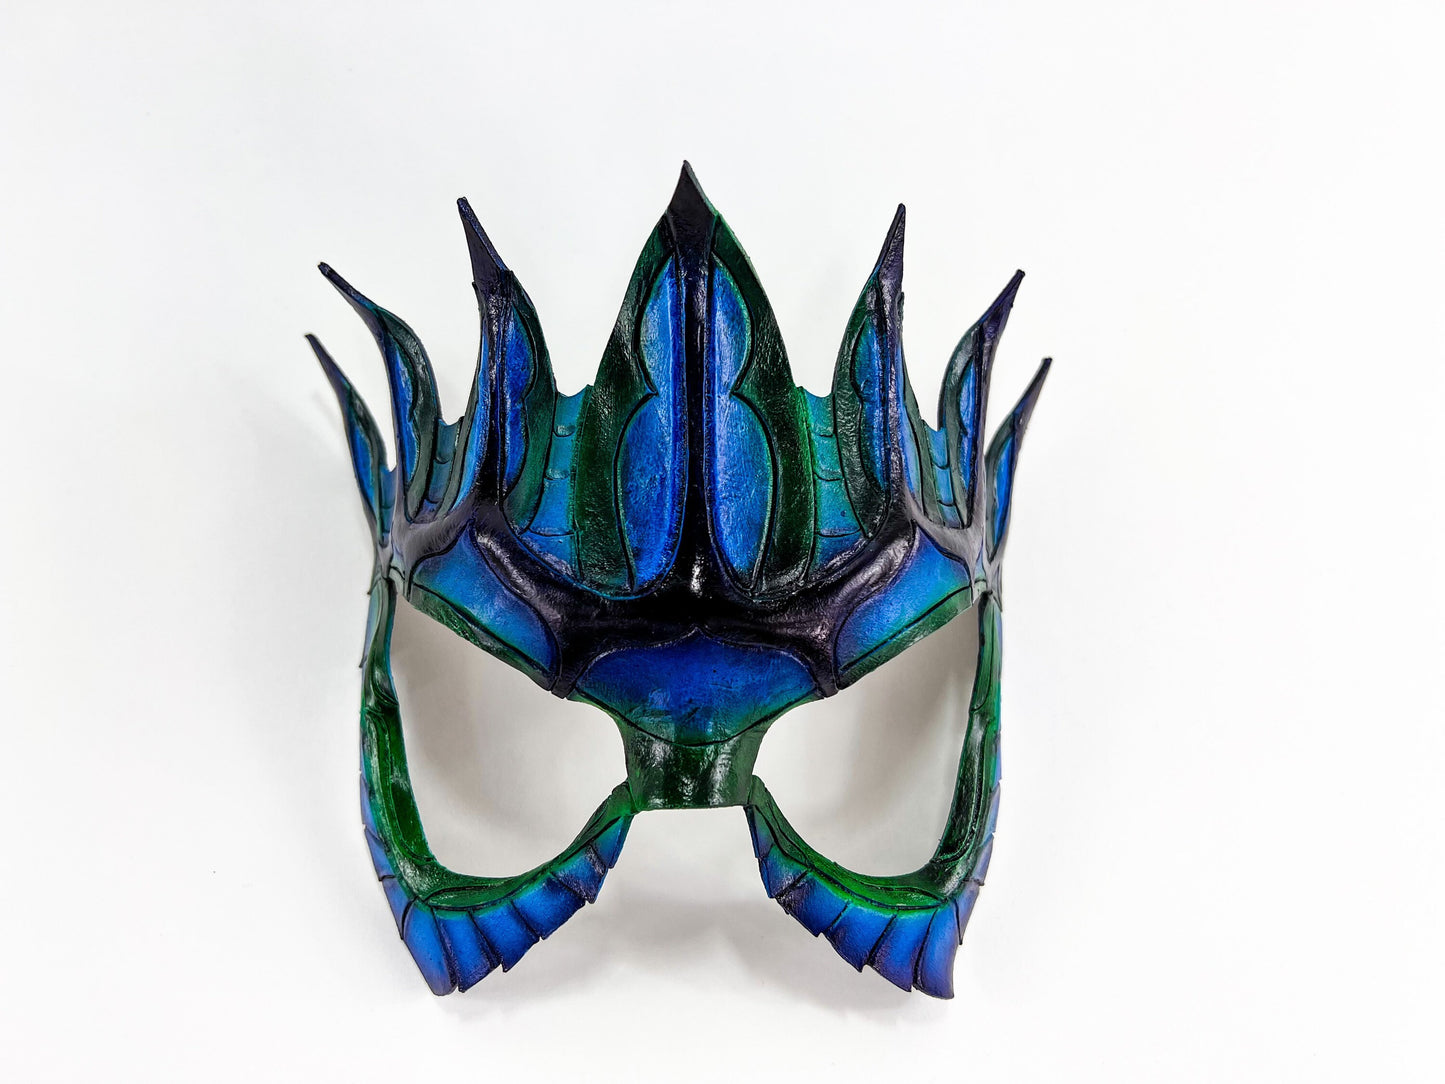 Masquerade Crown Mask of Handmade Genuine Leather in blue